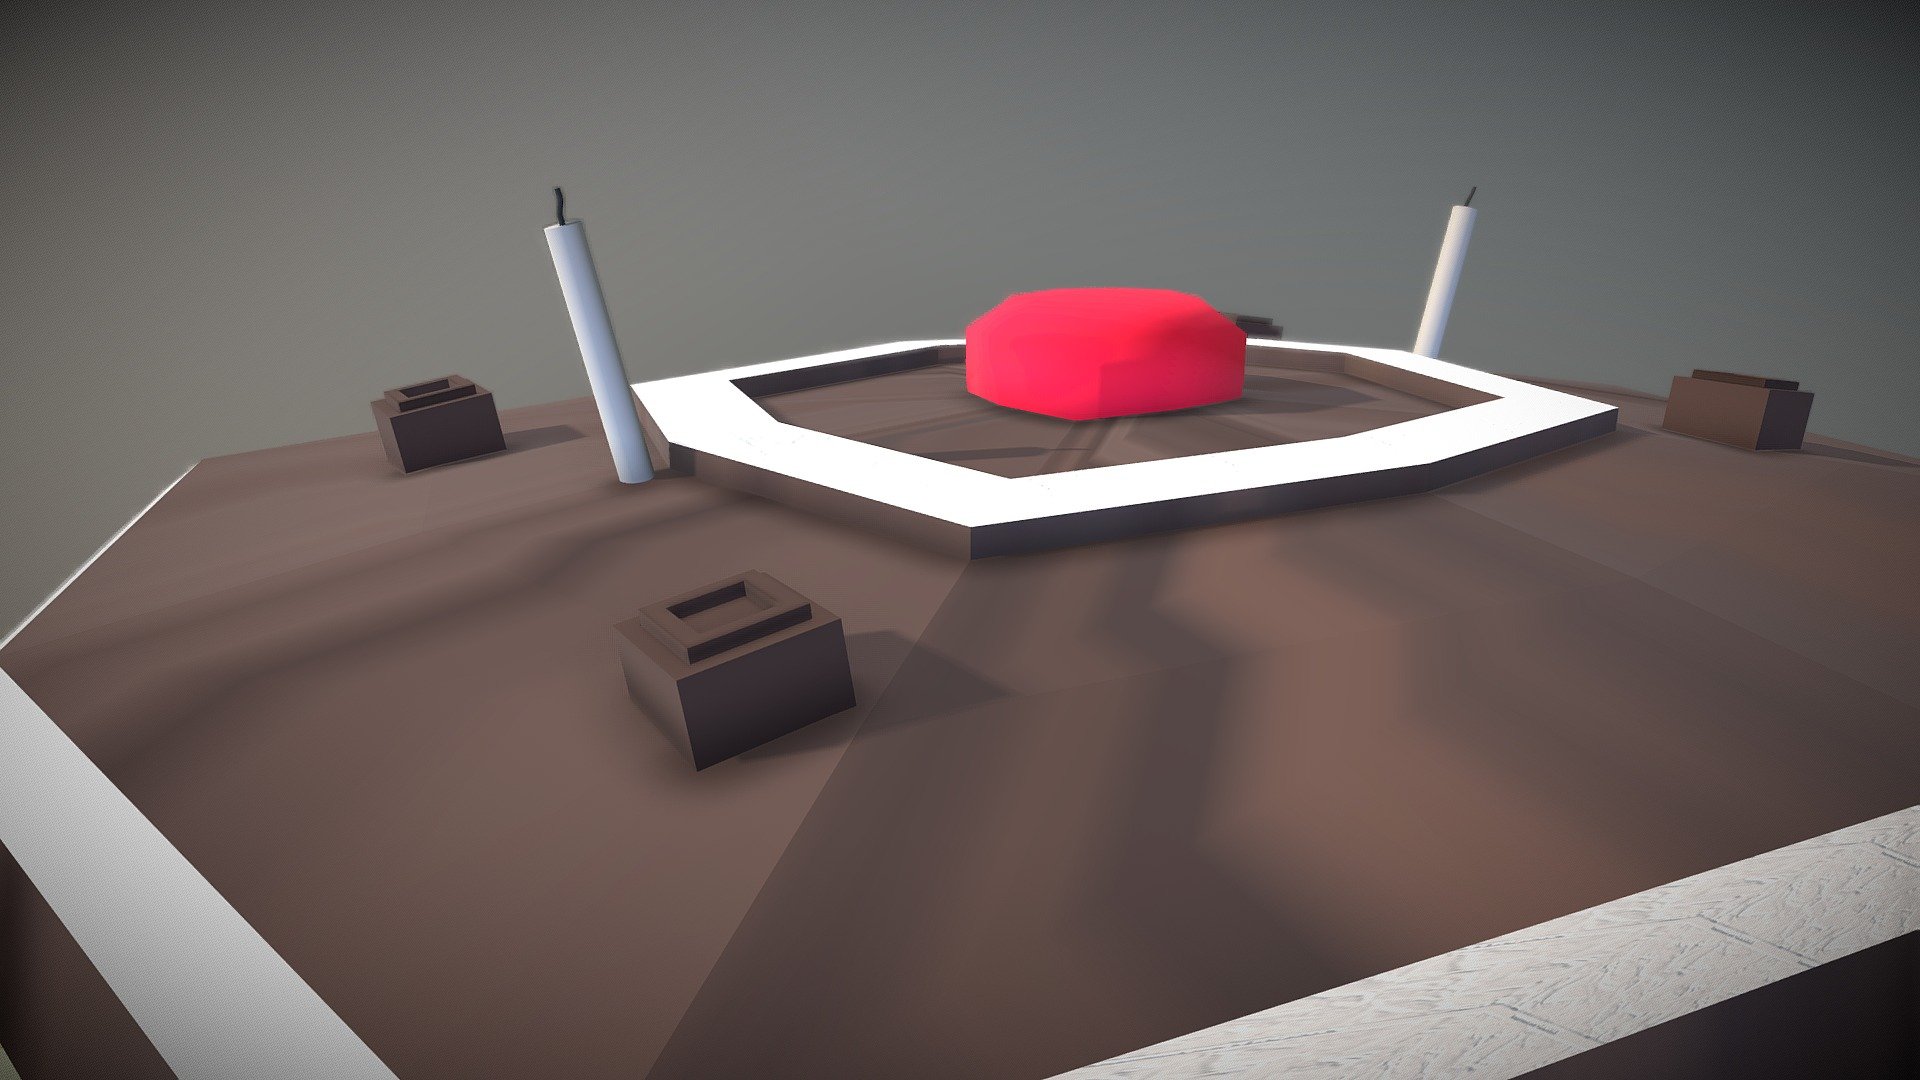 The Boring Low Poly Cake